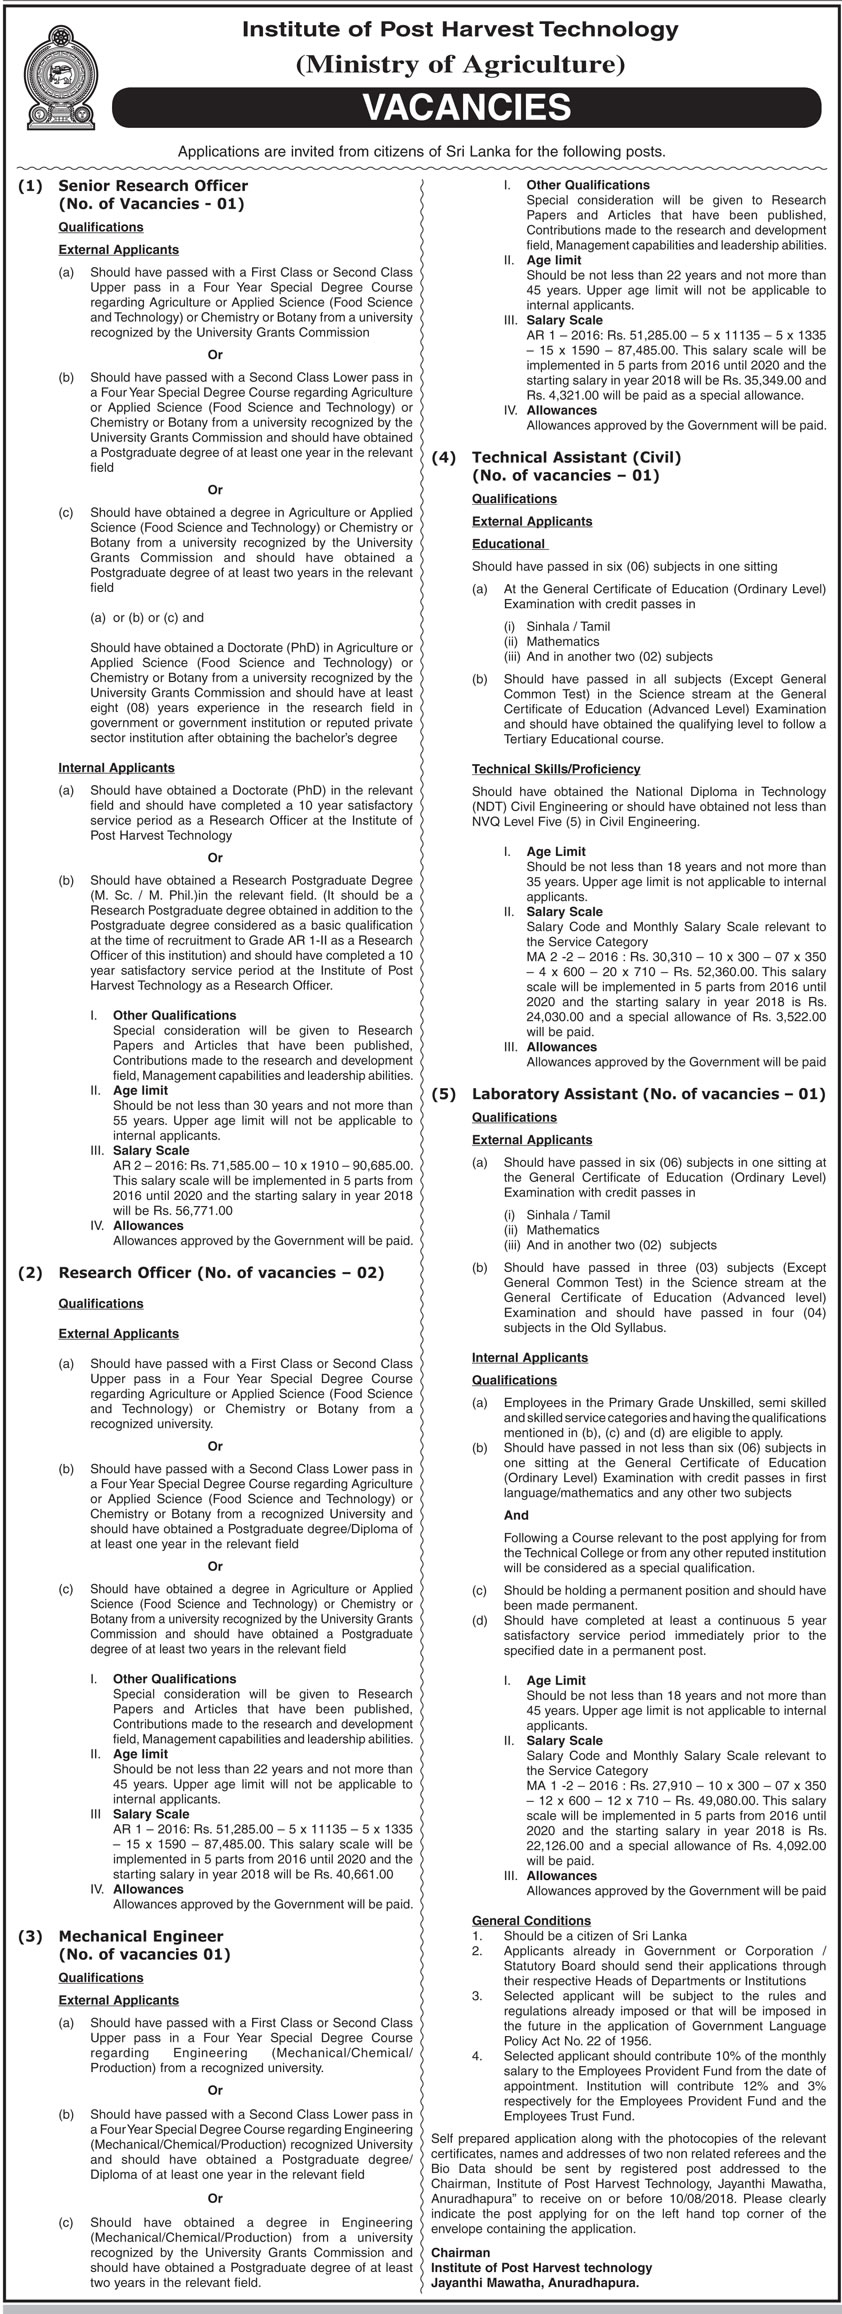 Institute of Post Harvest Technology Senior Research Officer, Research Officer, Mechanical Engineer, Technical Assistant (Civil), Laboratory Assistant Jobs Vacancies